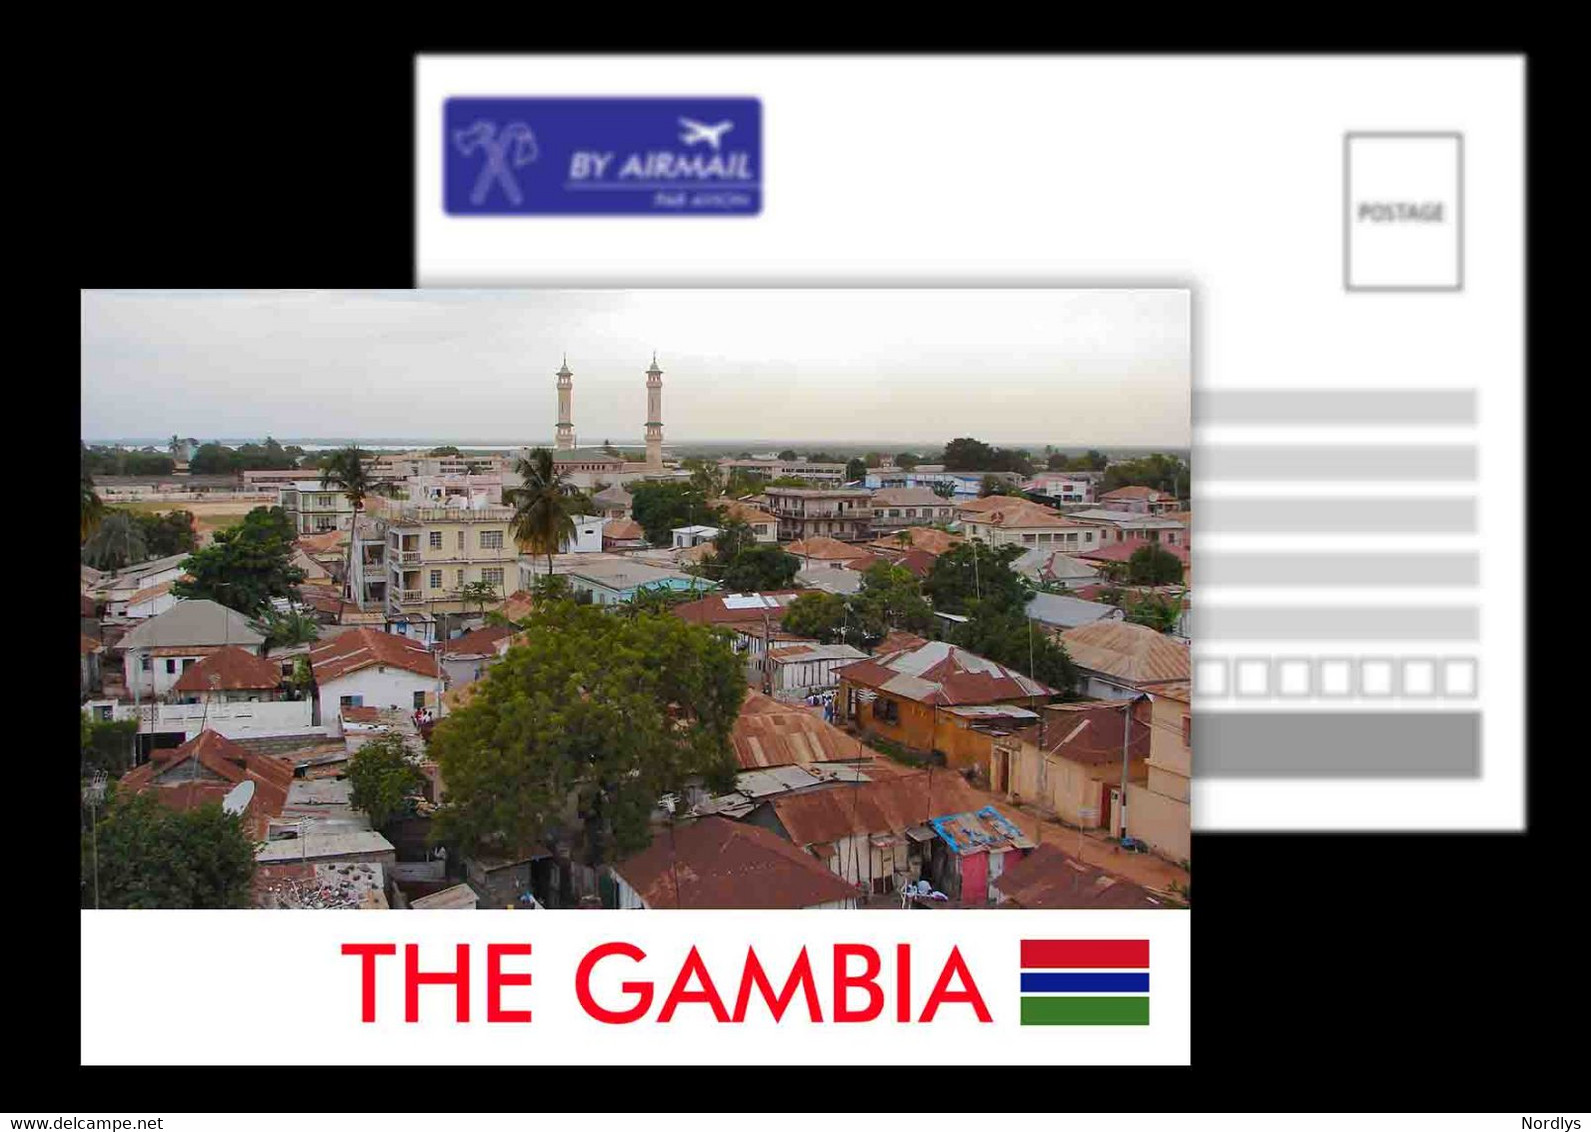 Gambia / Postcard / View Card - Gambia